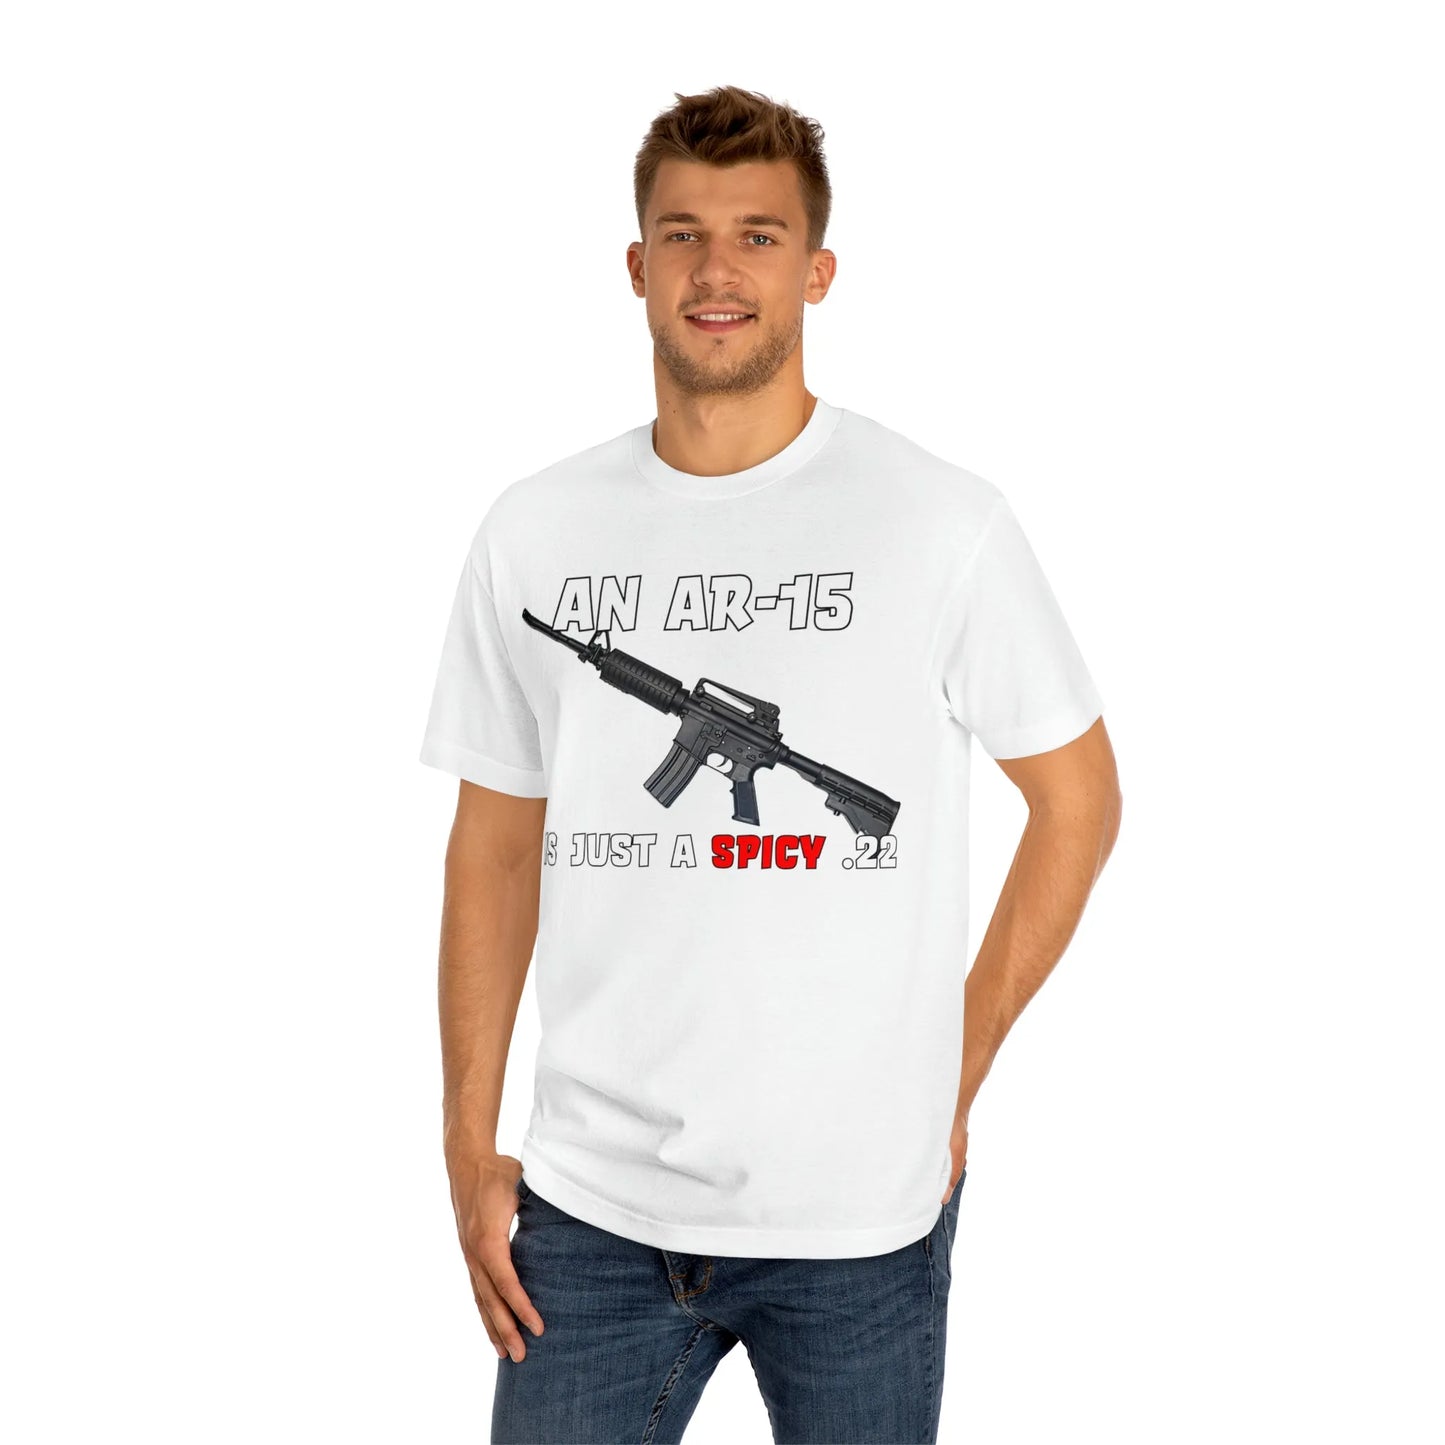 The "Spicy .22" T-Shirt: Unite to STOP Hoplophobia! 🇺🇸